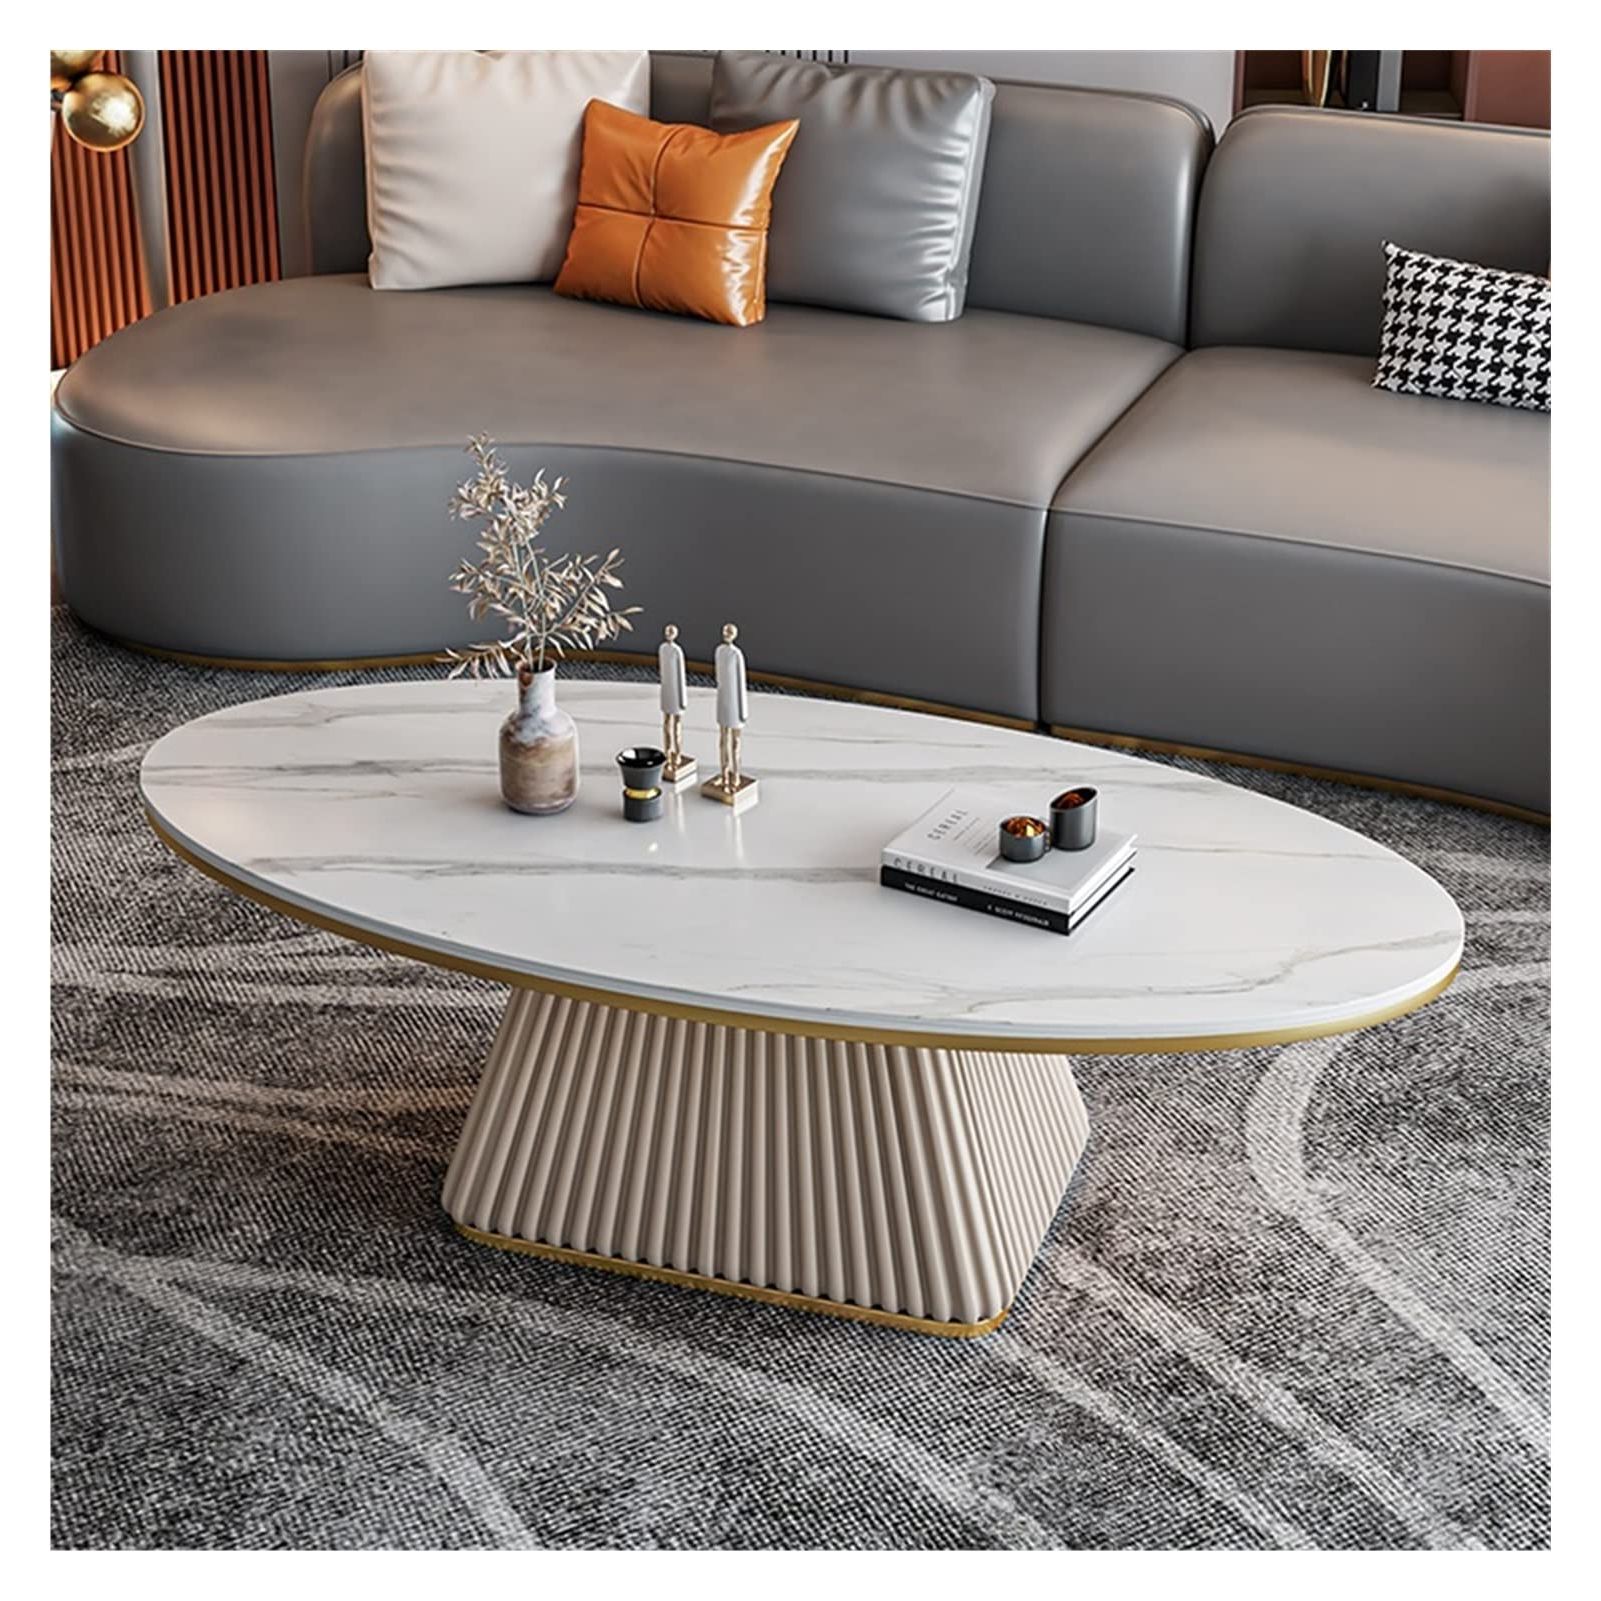 Most Recent Simple Design Coffee Tables Throughout Simple Design Coffee Table Coffee Table Simple Modern Small Apartment  Living Room Home Nordic Creative Oval Coffee Table Minimalist Side Table  For Living Room (style : C) : Amazon (View 4 of 10)